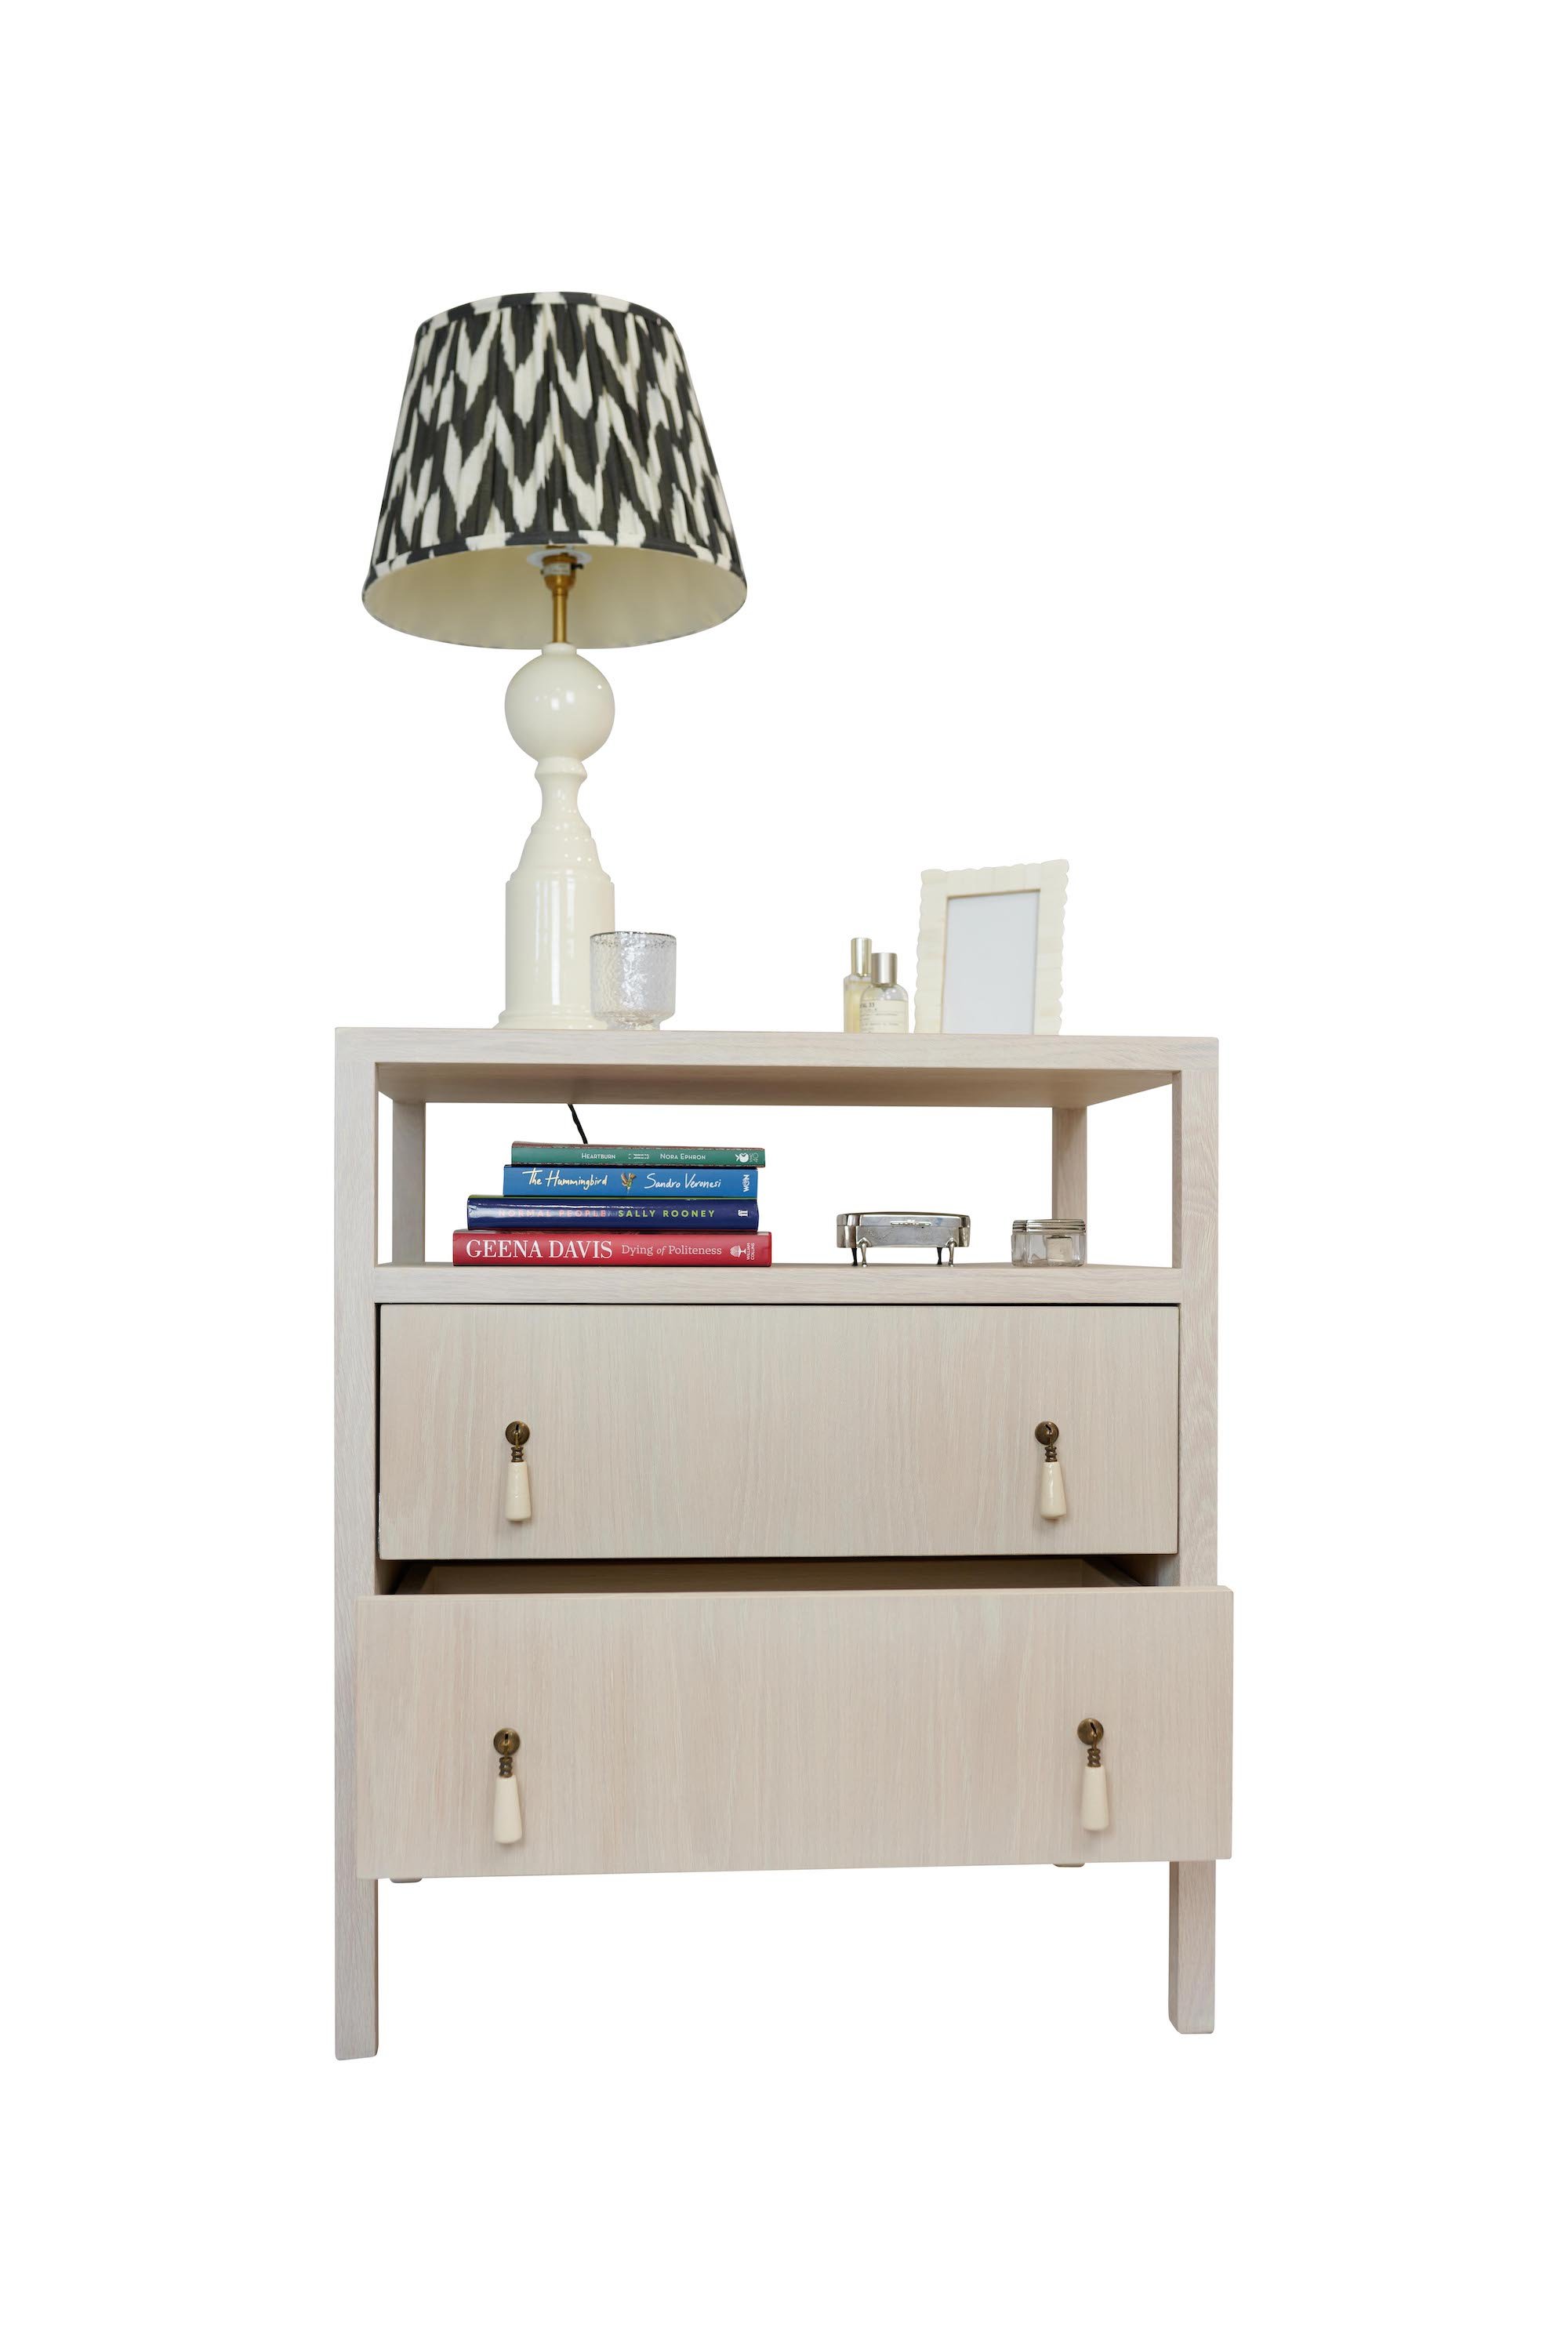 Stella Trading Bedside Table, Wood, White, 28 X 39 X 41 cm